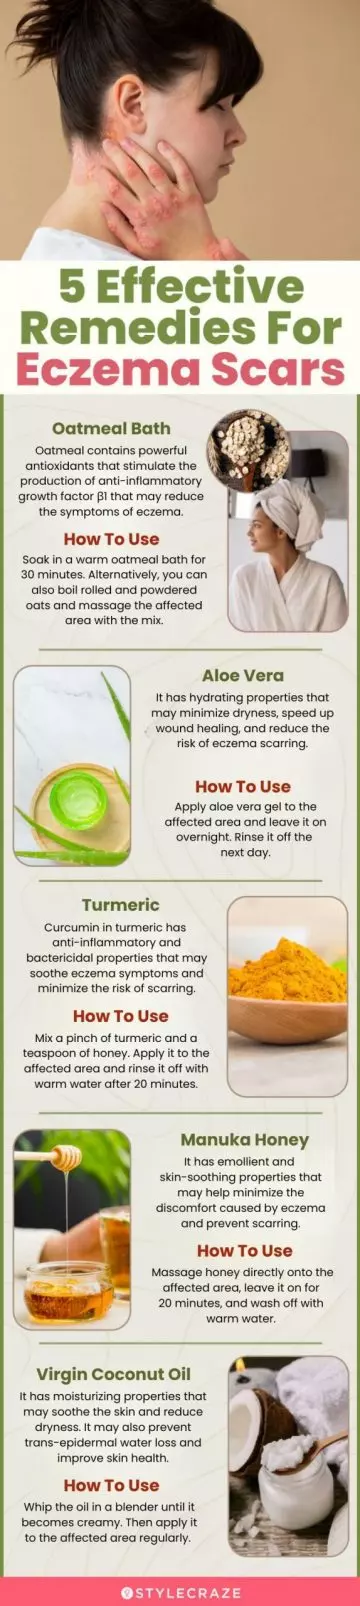 5 effective remedies for eczema scars (infographic)